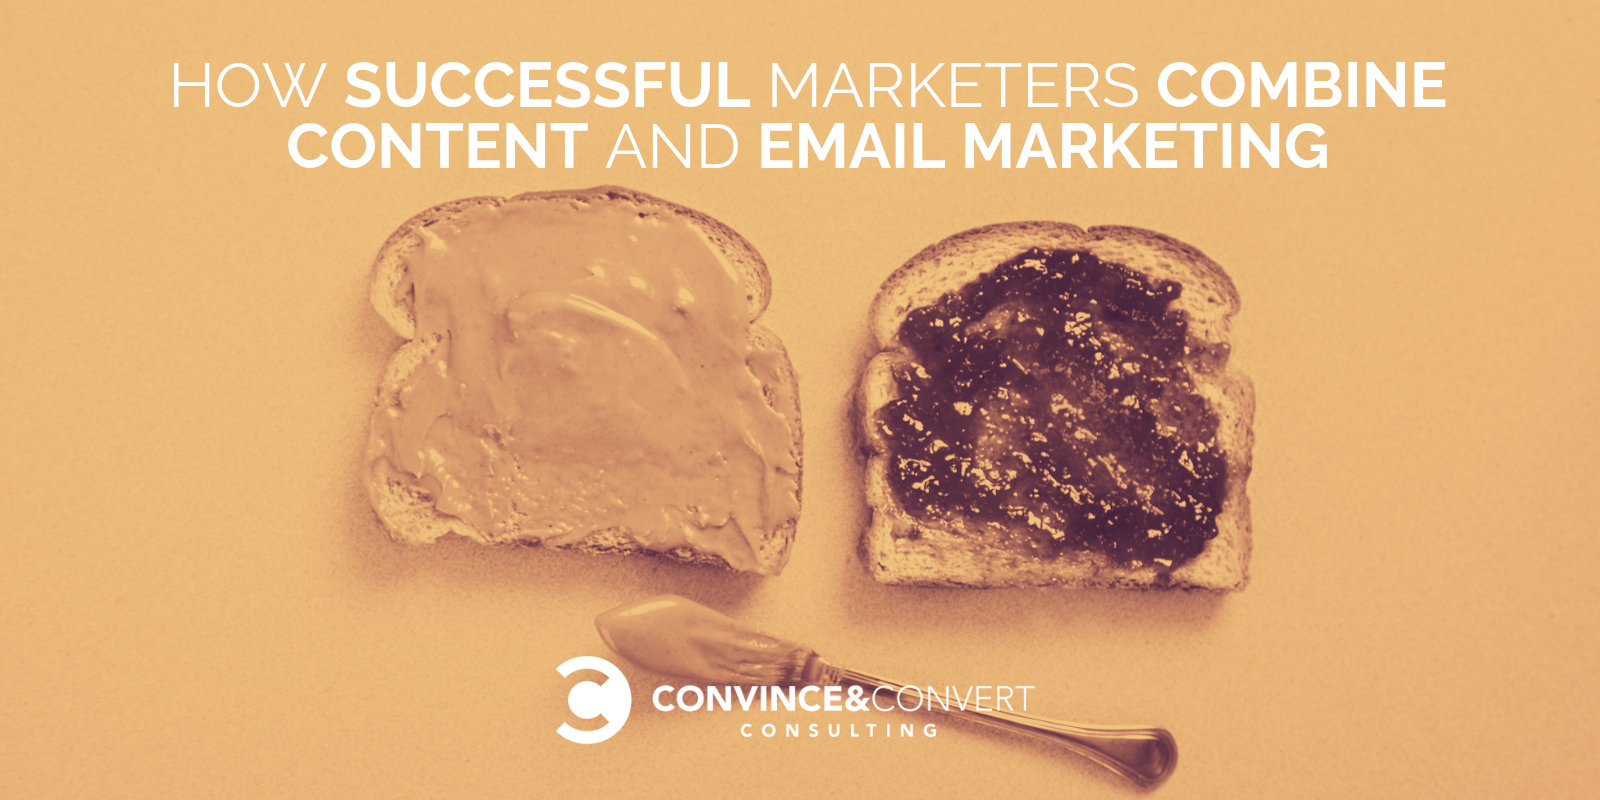 How Successful Marketers Combine Content and Email Marketing